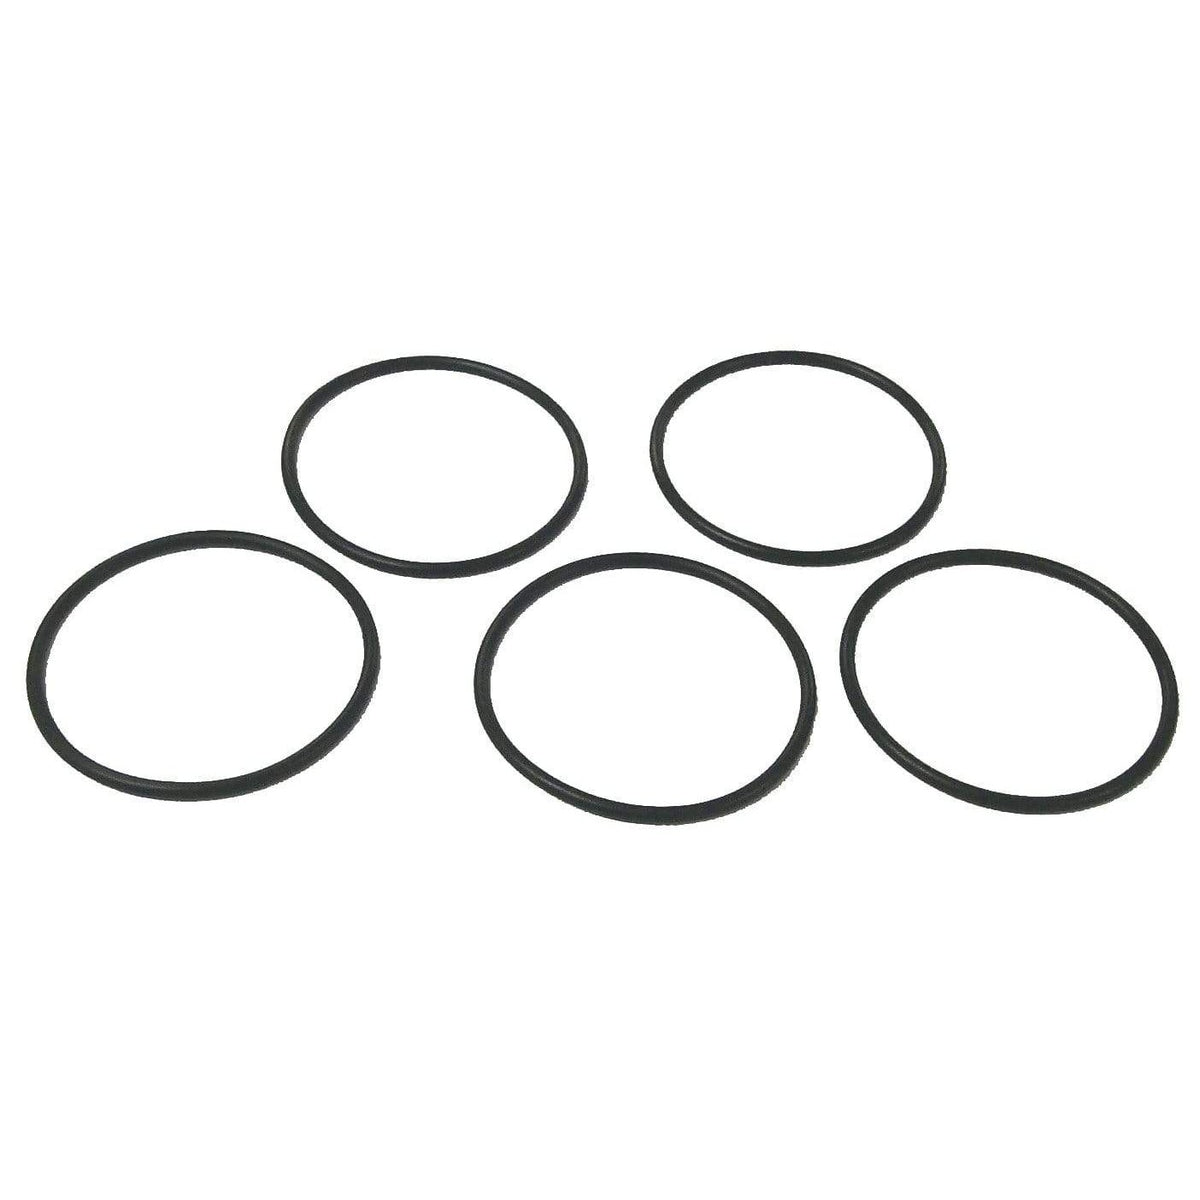 Sierra Not Qualified for Free Shipping Sierra O-Ring 5-pk #18-7152-9